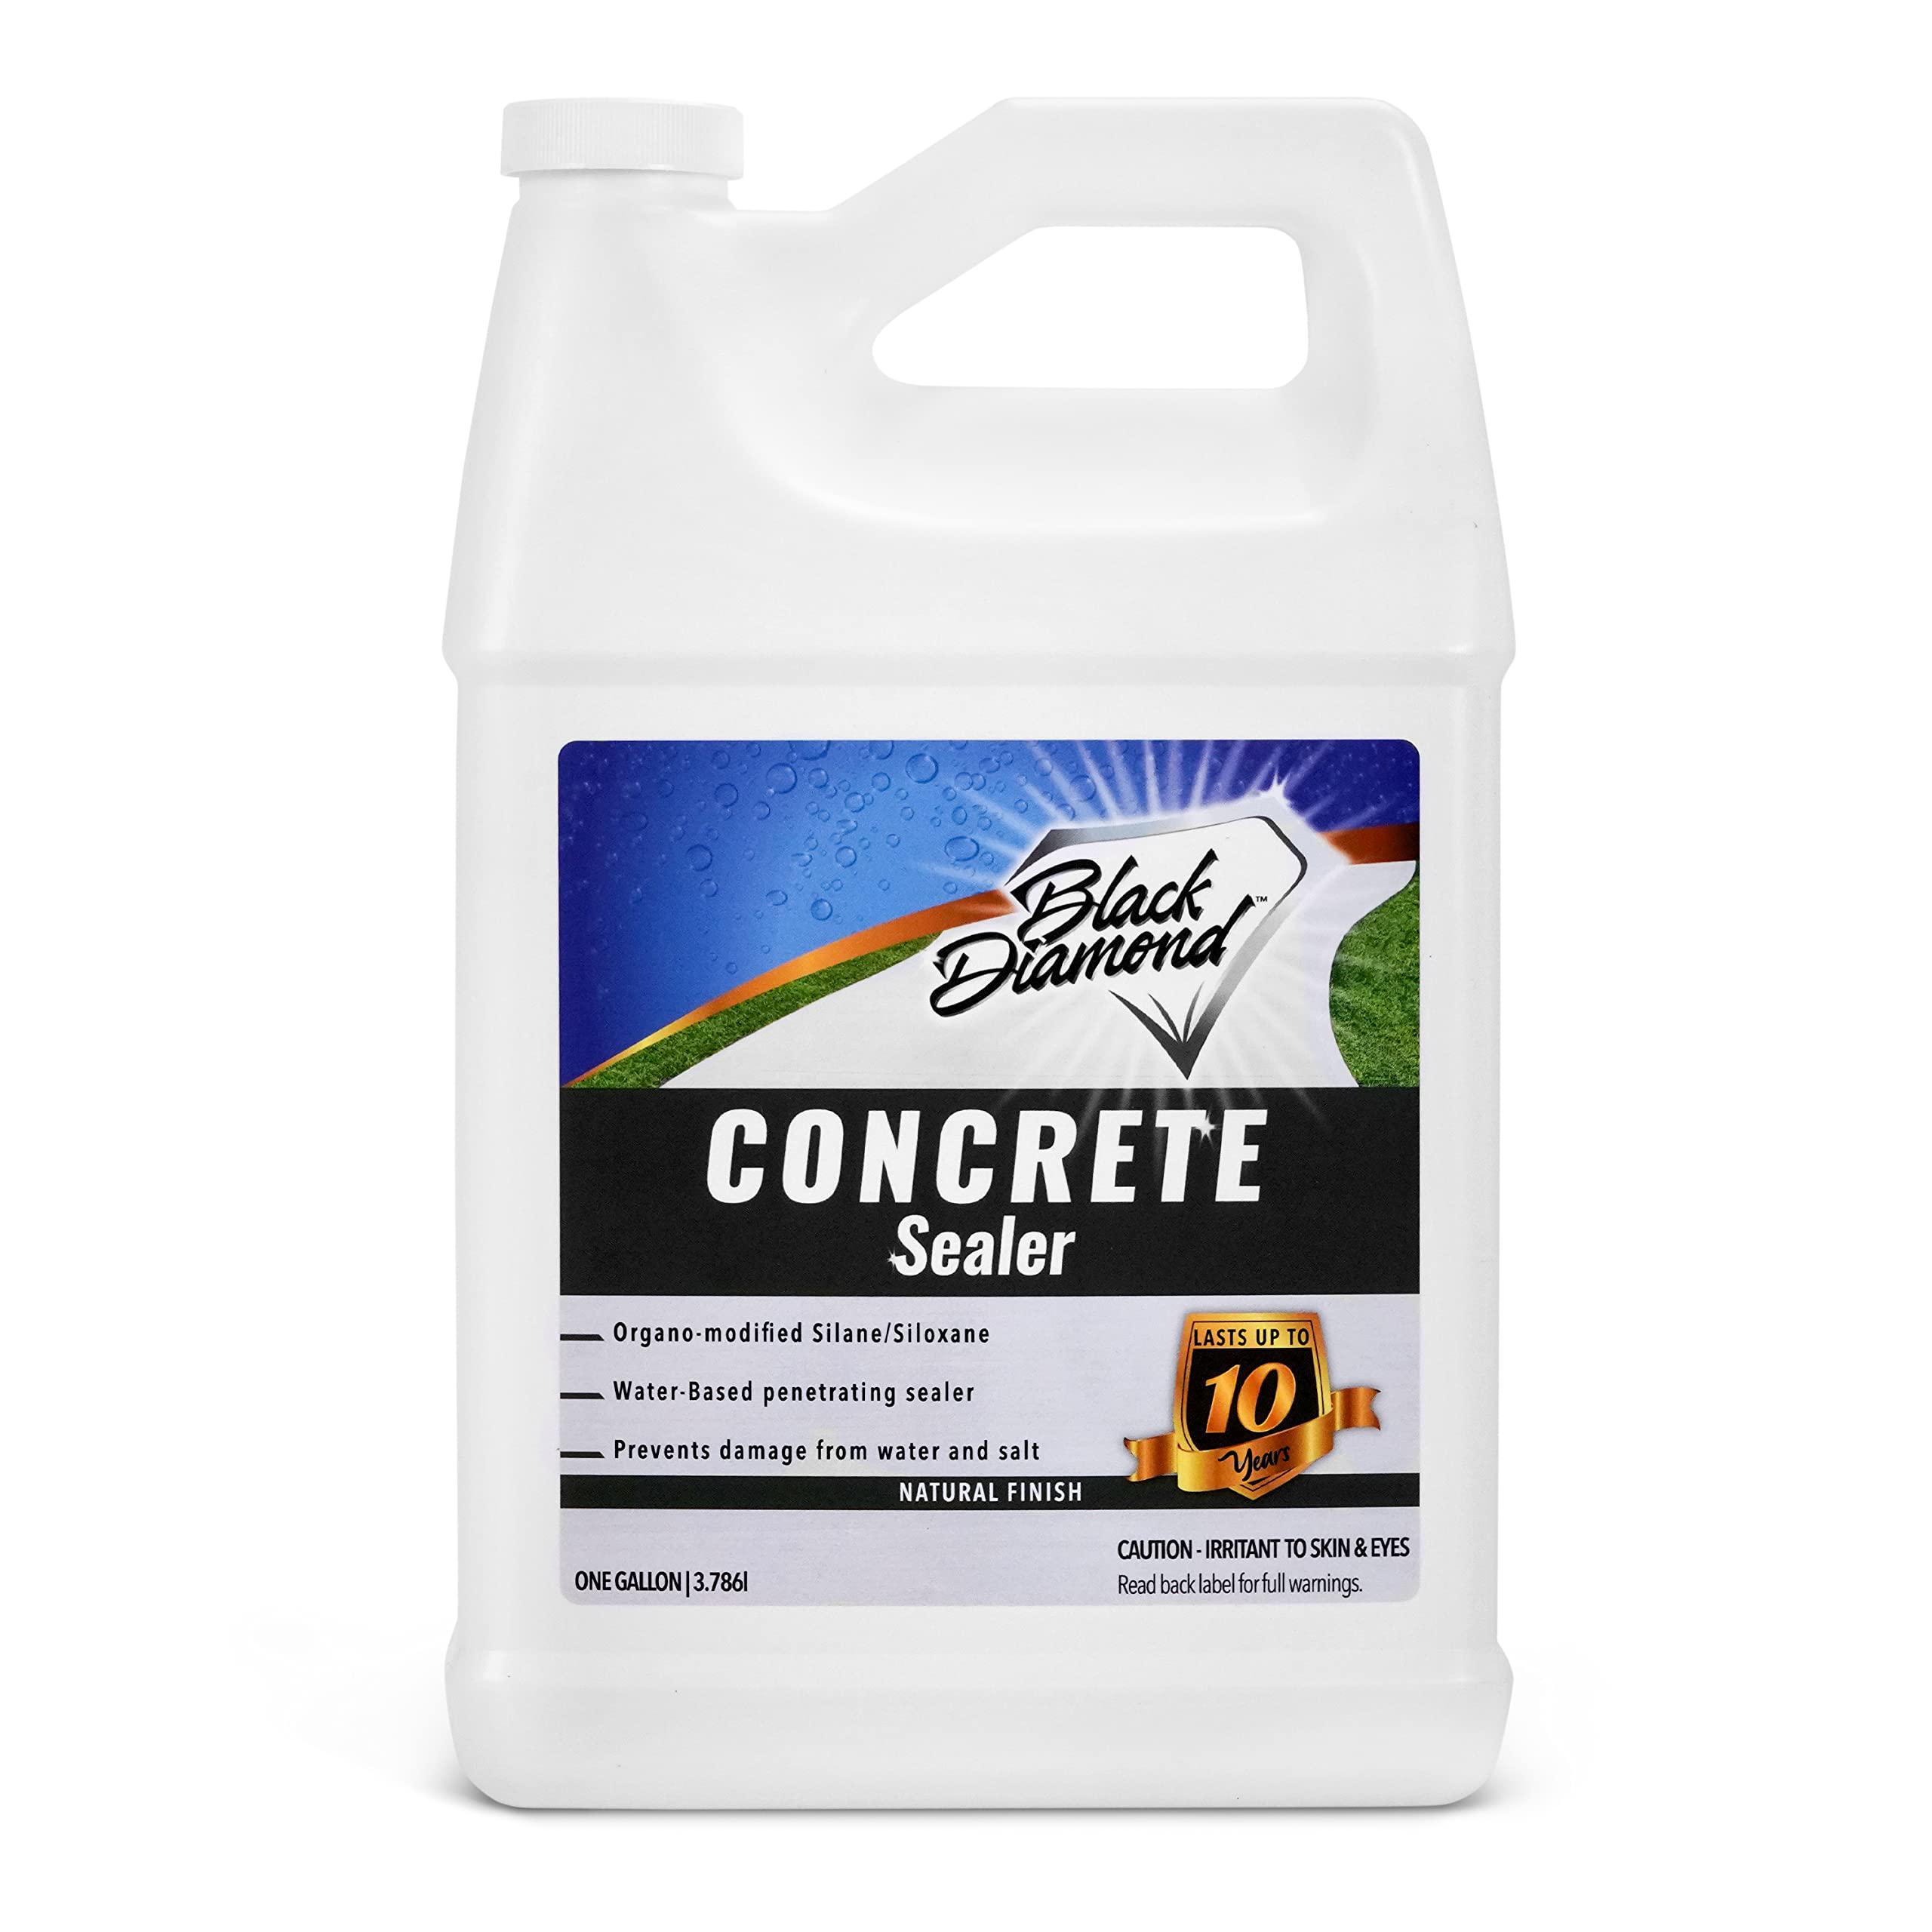 Black Diamond Stoneworks concrete sealer clear penetrating waterproofing spray, the best sealant to seal your driveway, cement patio pavers, brick, st